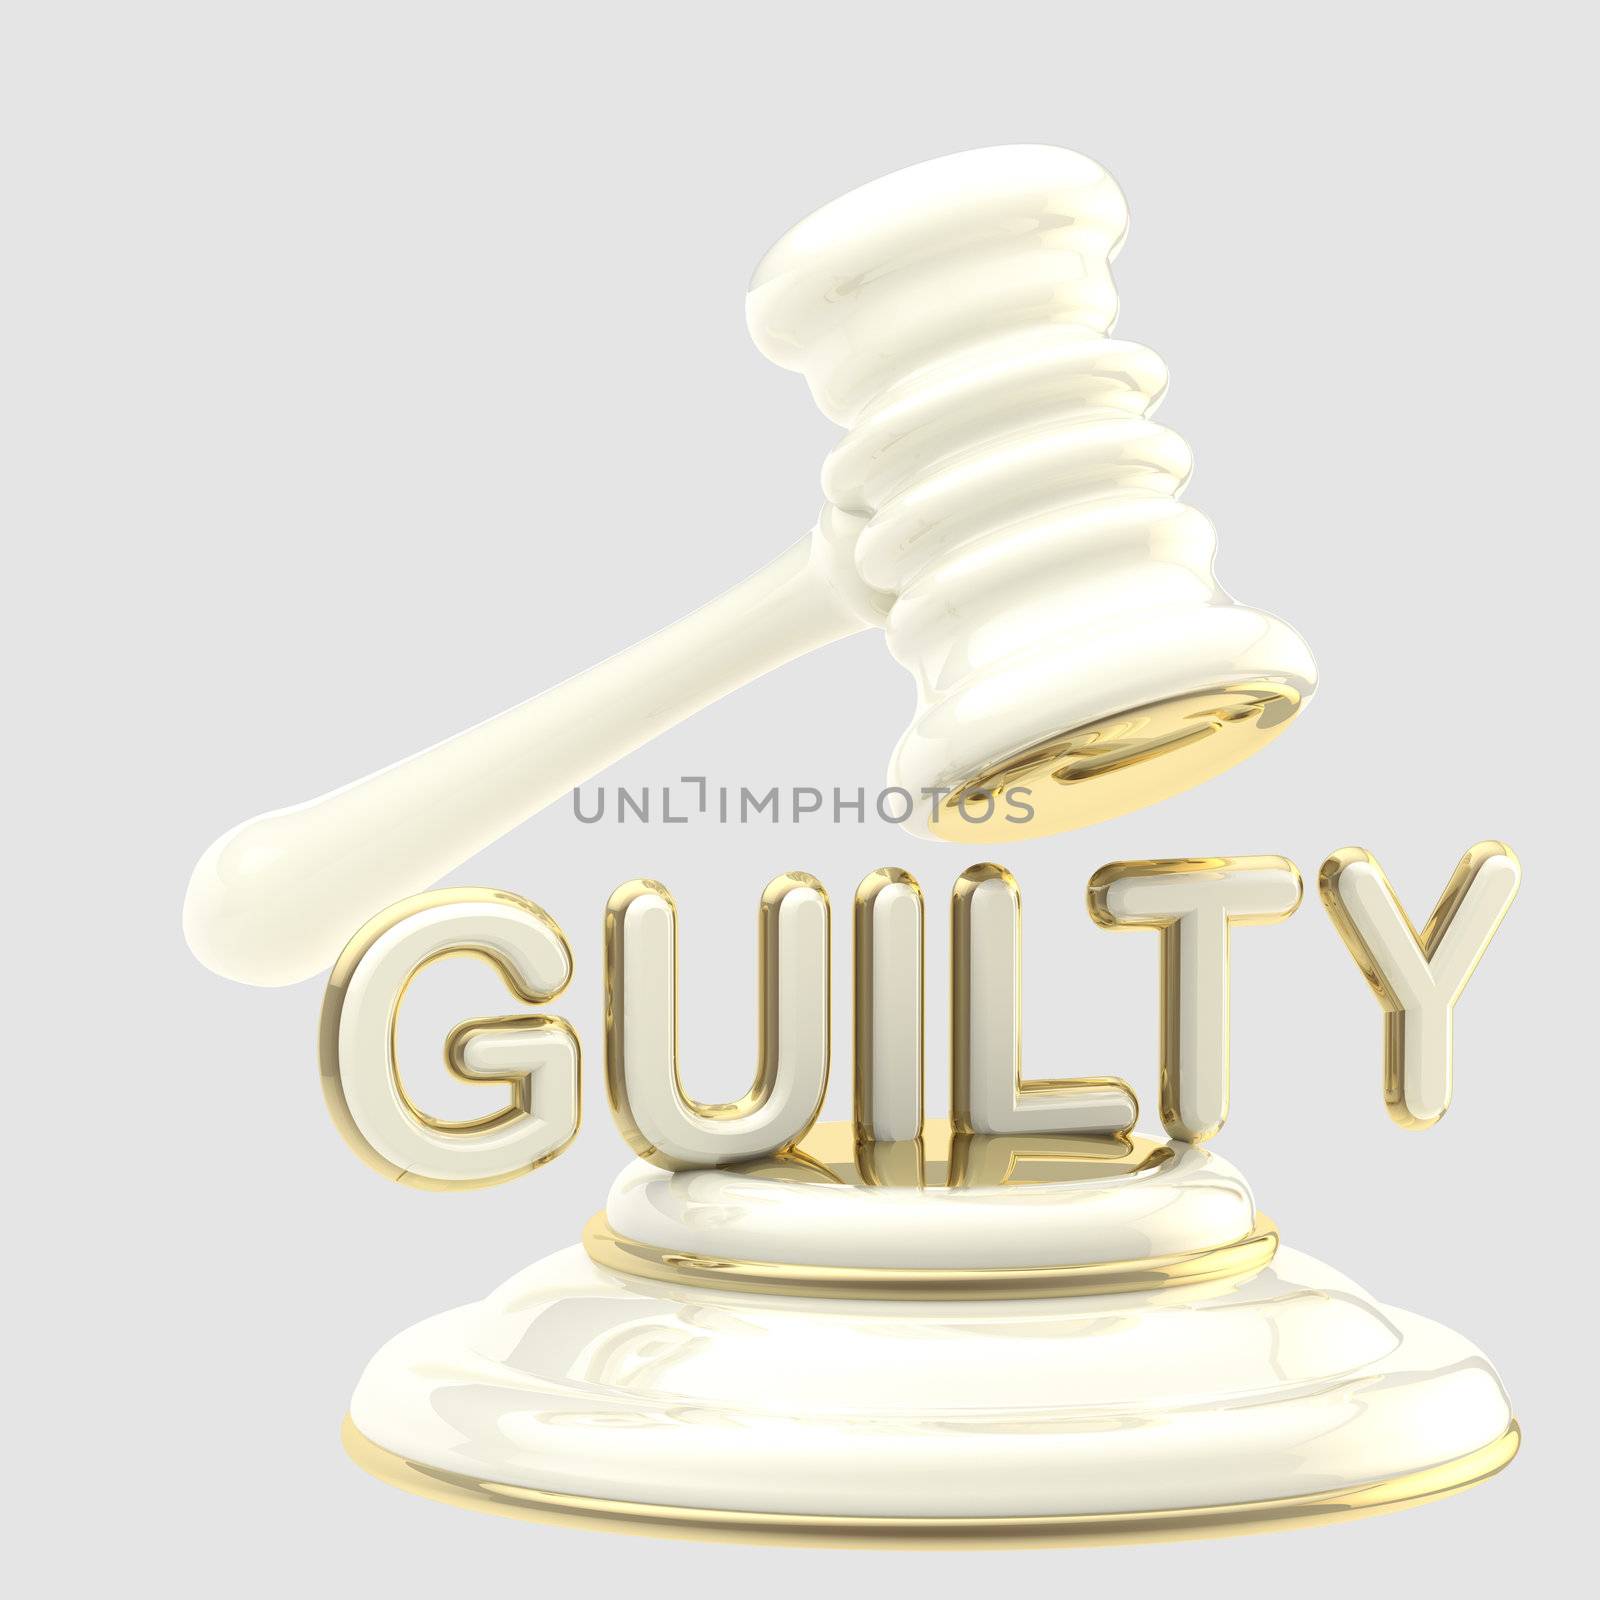 Word "guilty" under glossy white and golden judge's gavel